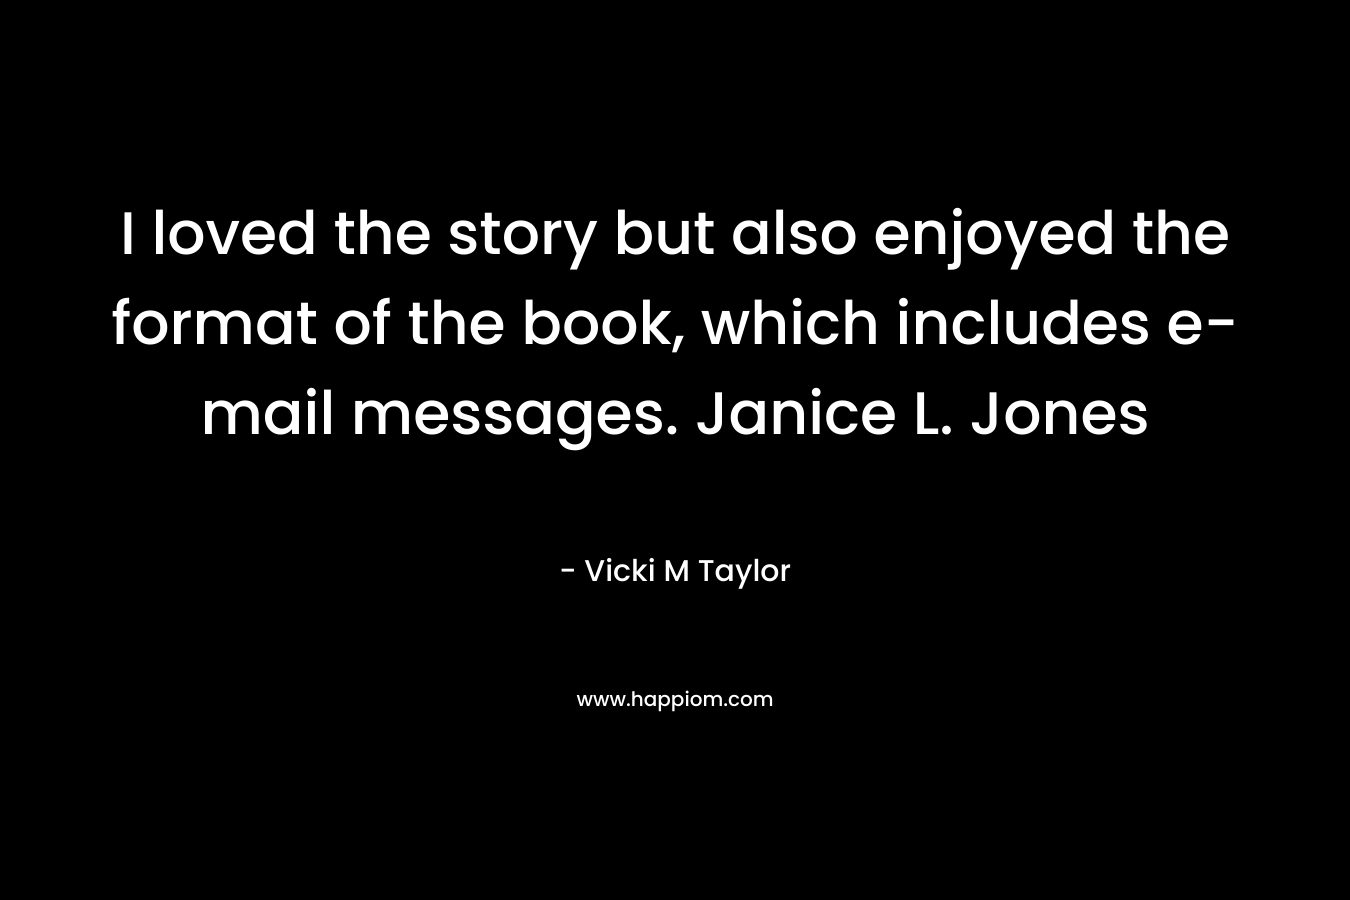 I loved the story but also enjoyed the format of the book, which includes e-mail messages. Janice L. Jones – Vicki M Taylor